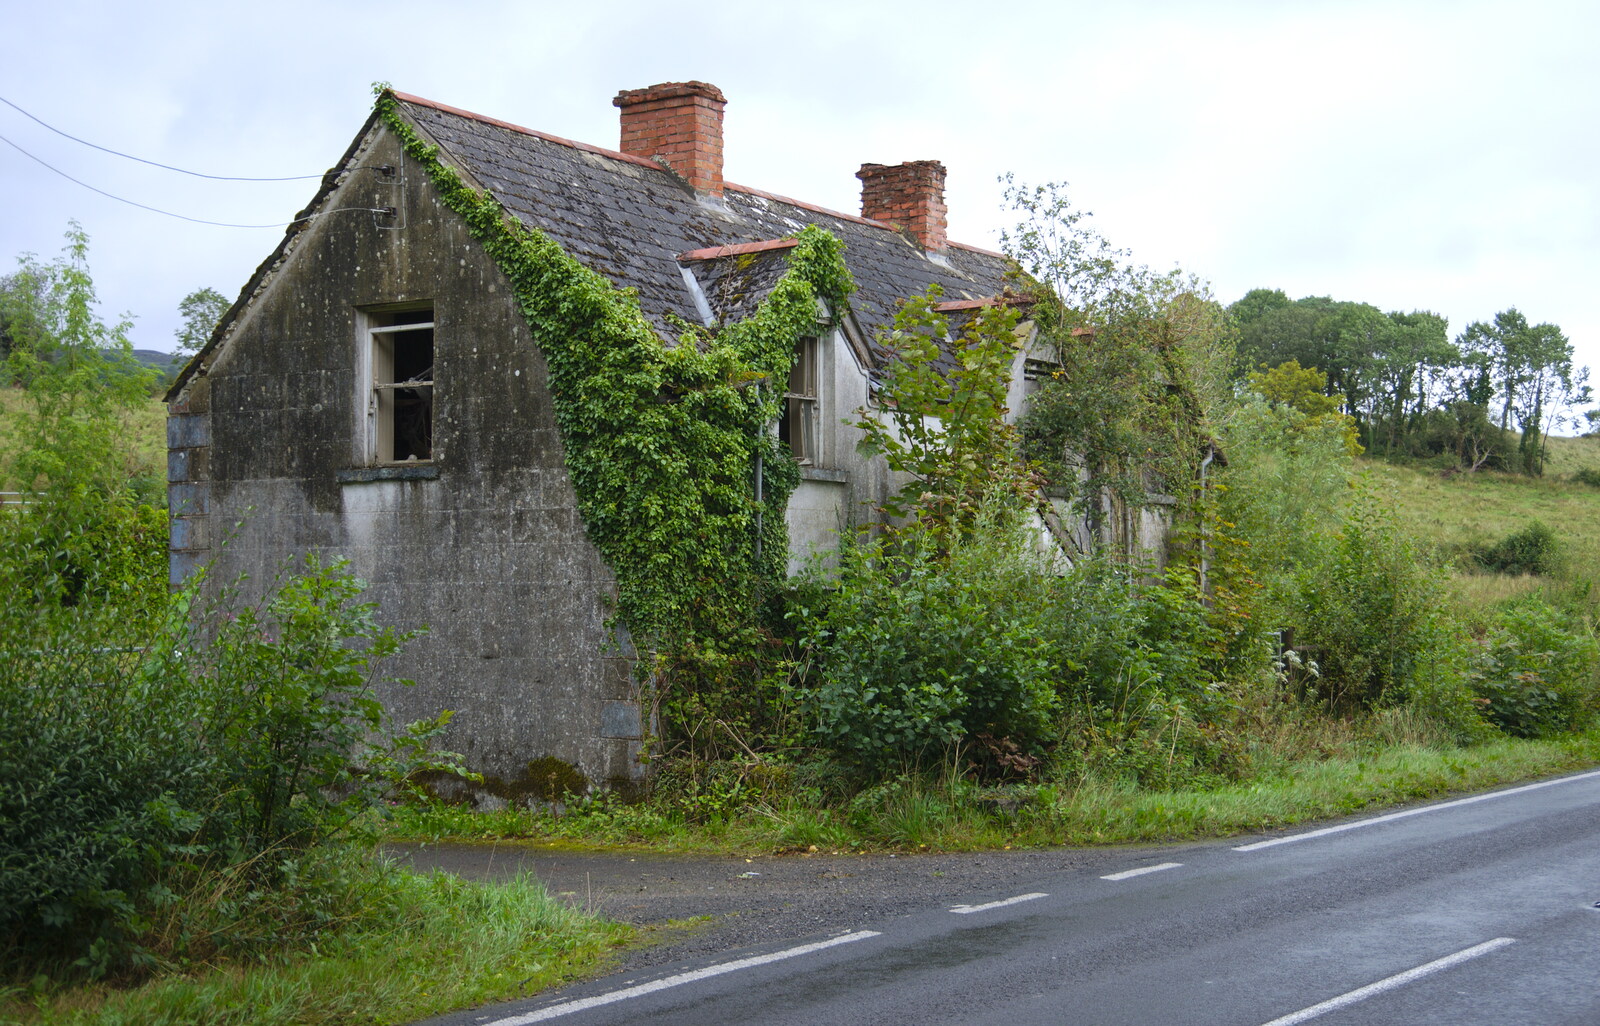 An epic derelict house on the A4 Sligo Road from Travels in the Borderlands: An Blaic/Blacklion to Belcoo and back, Cavan and Fermanagh, Ireland - 22nd August 2019